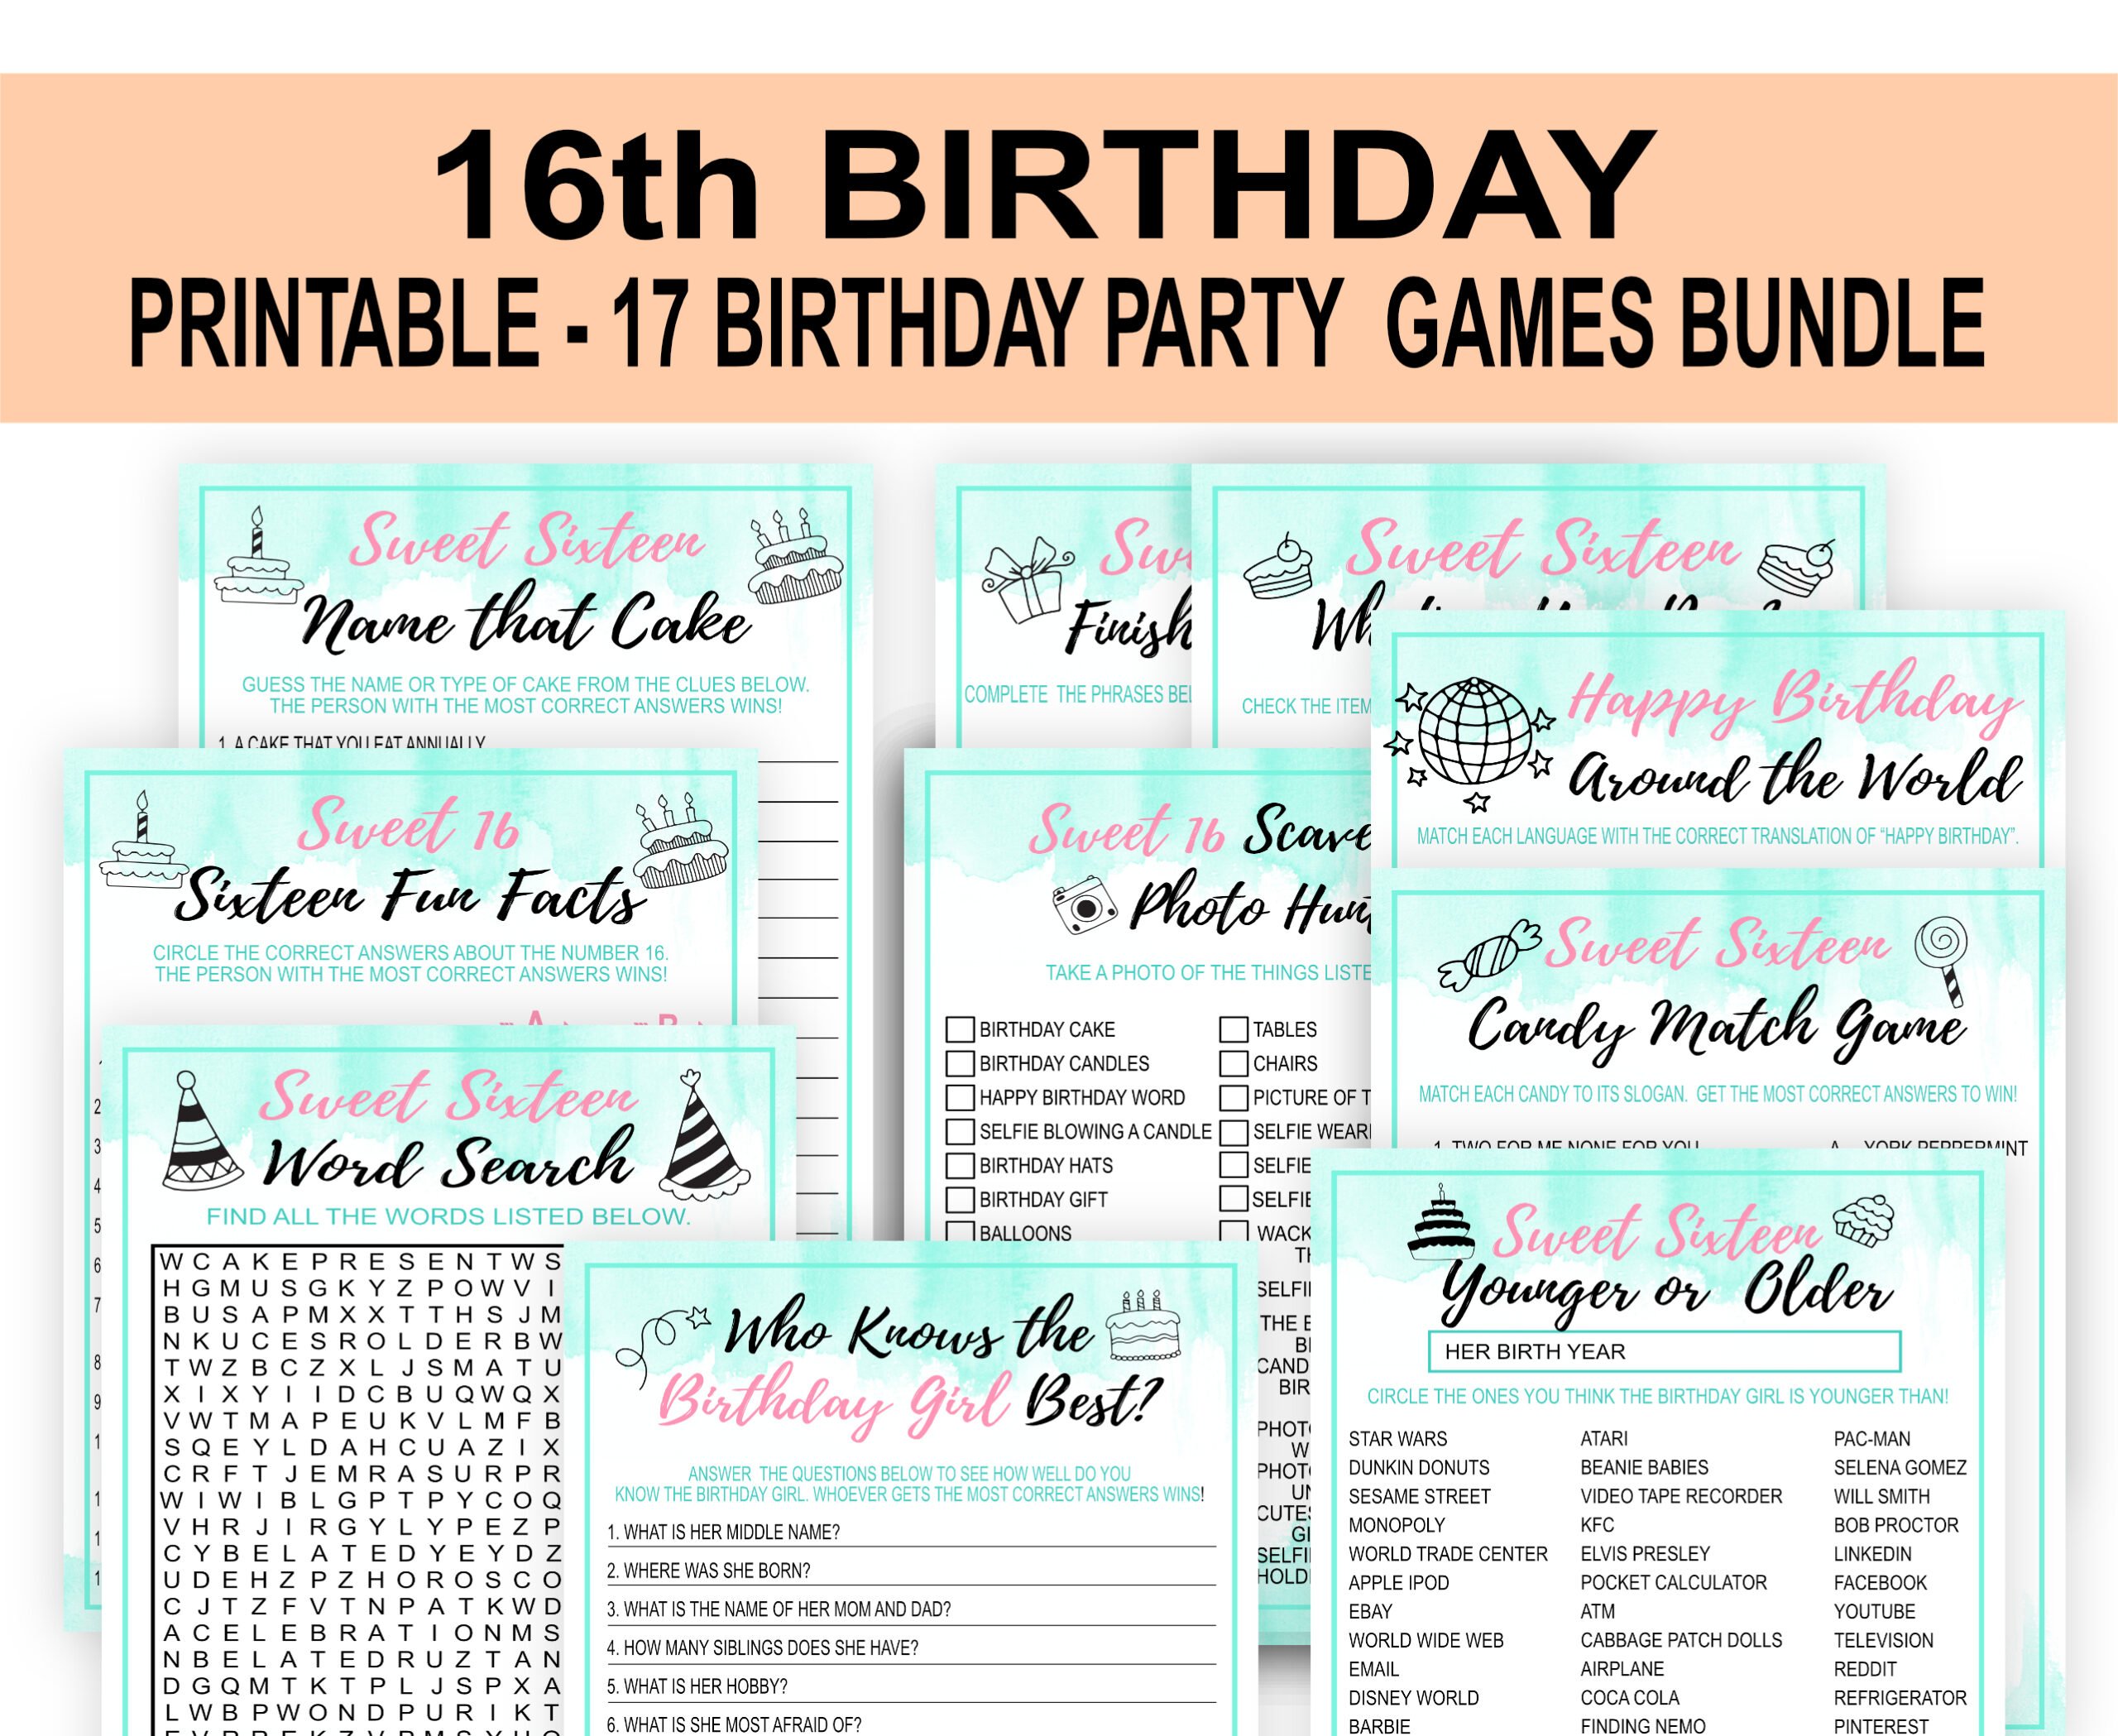 BIRTHDAY GAMES SWEET SIXTEEN 17-1 B-DAY GAMES BUNDLE 16th Birthday Party Games